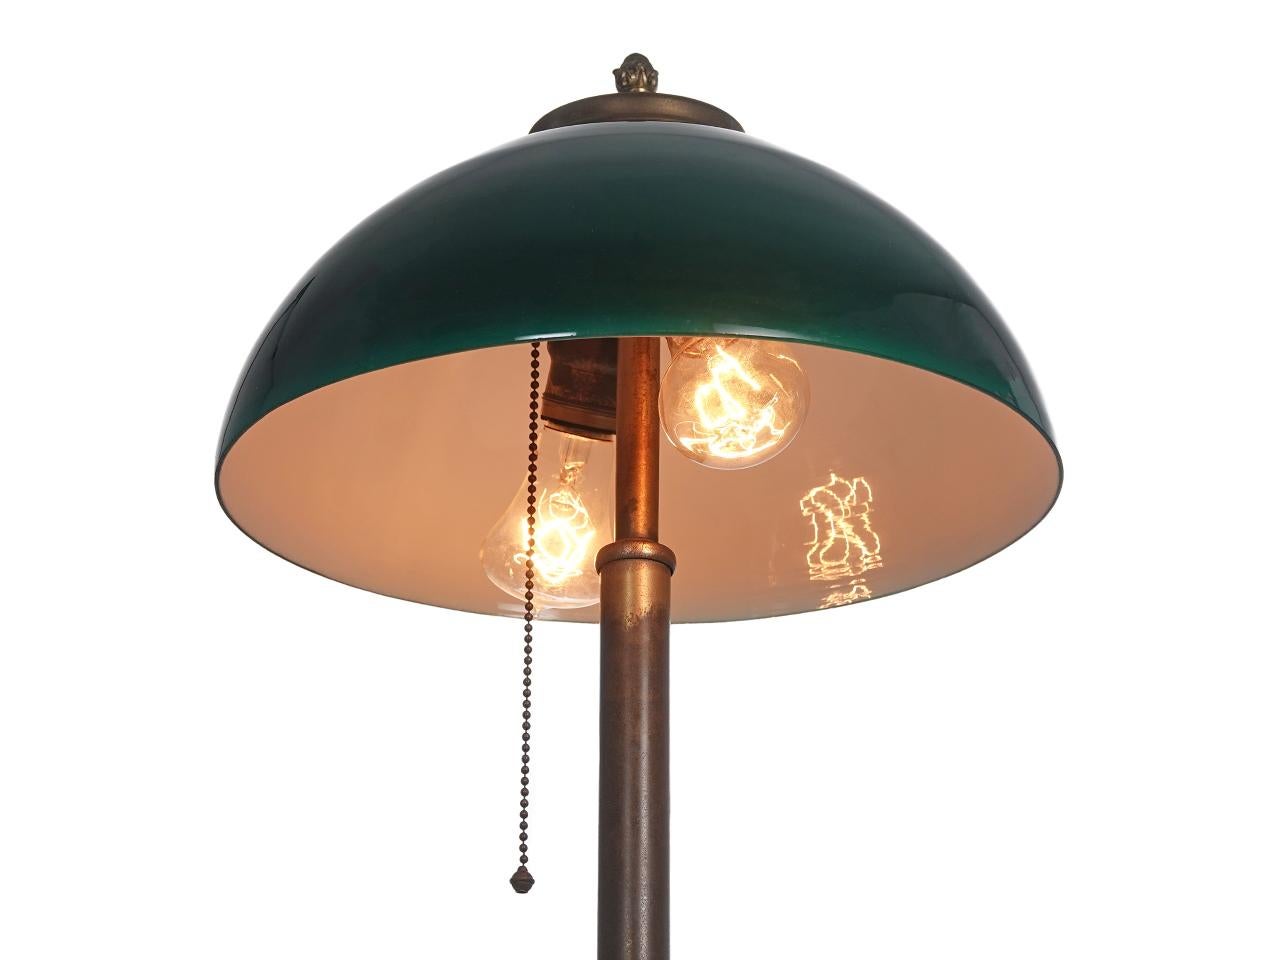 This is a very simple and elegant desk lamp that will fit comfortably alongside any decor. It has just the right look. The rare 12 inch dome is green over white sandwich glass. We have not refinished the brass and left the original aged patina.